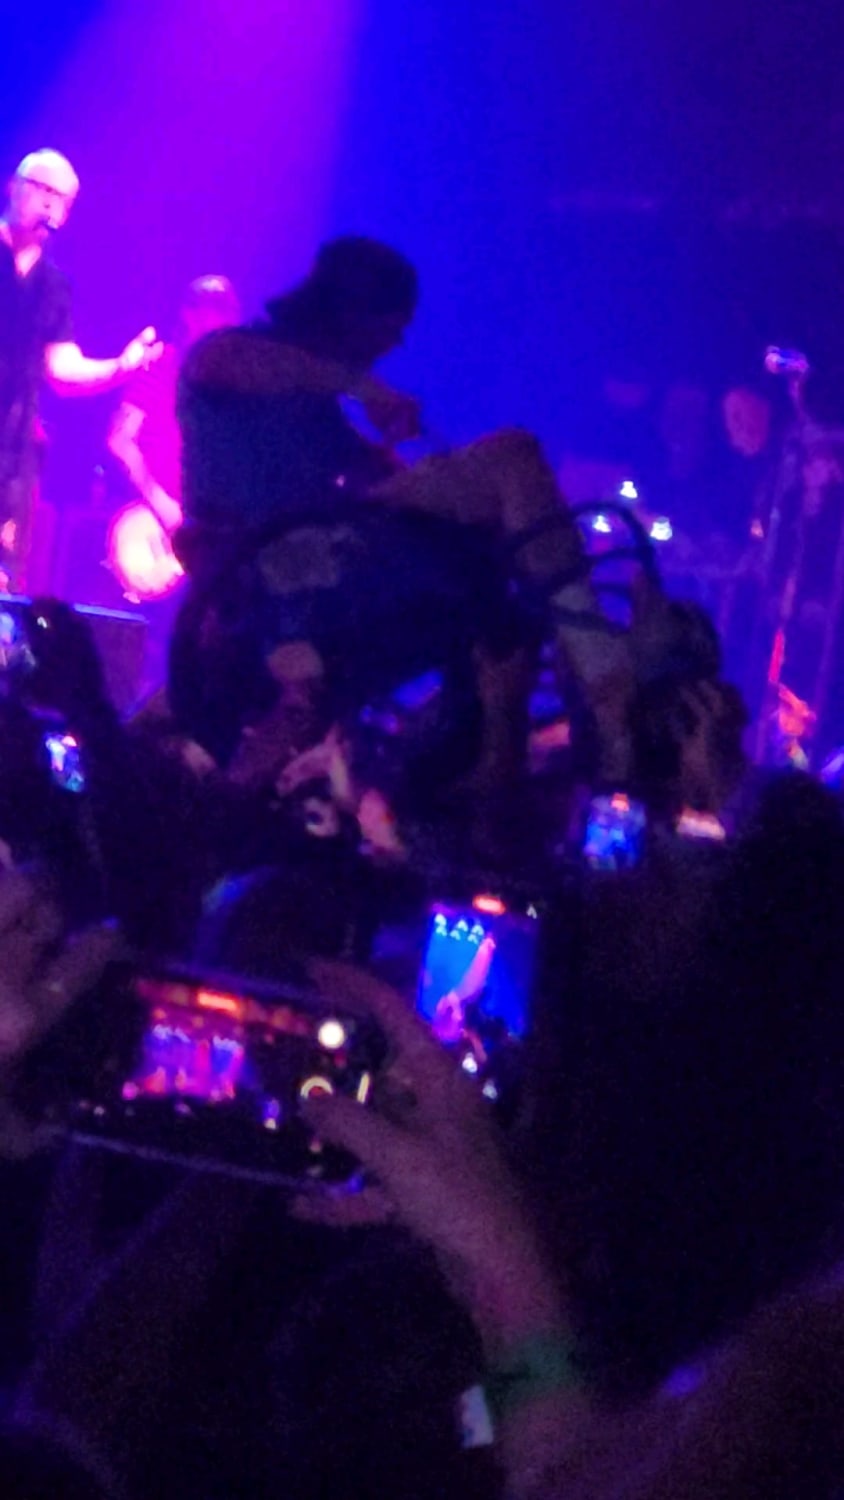 Saw Bad Religion tonight, fucking amazing show, but my favorite part was the dude crowd surfing in a wheelchair